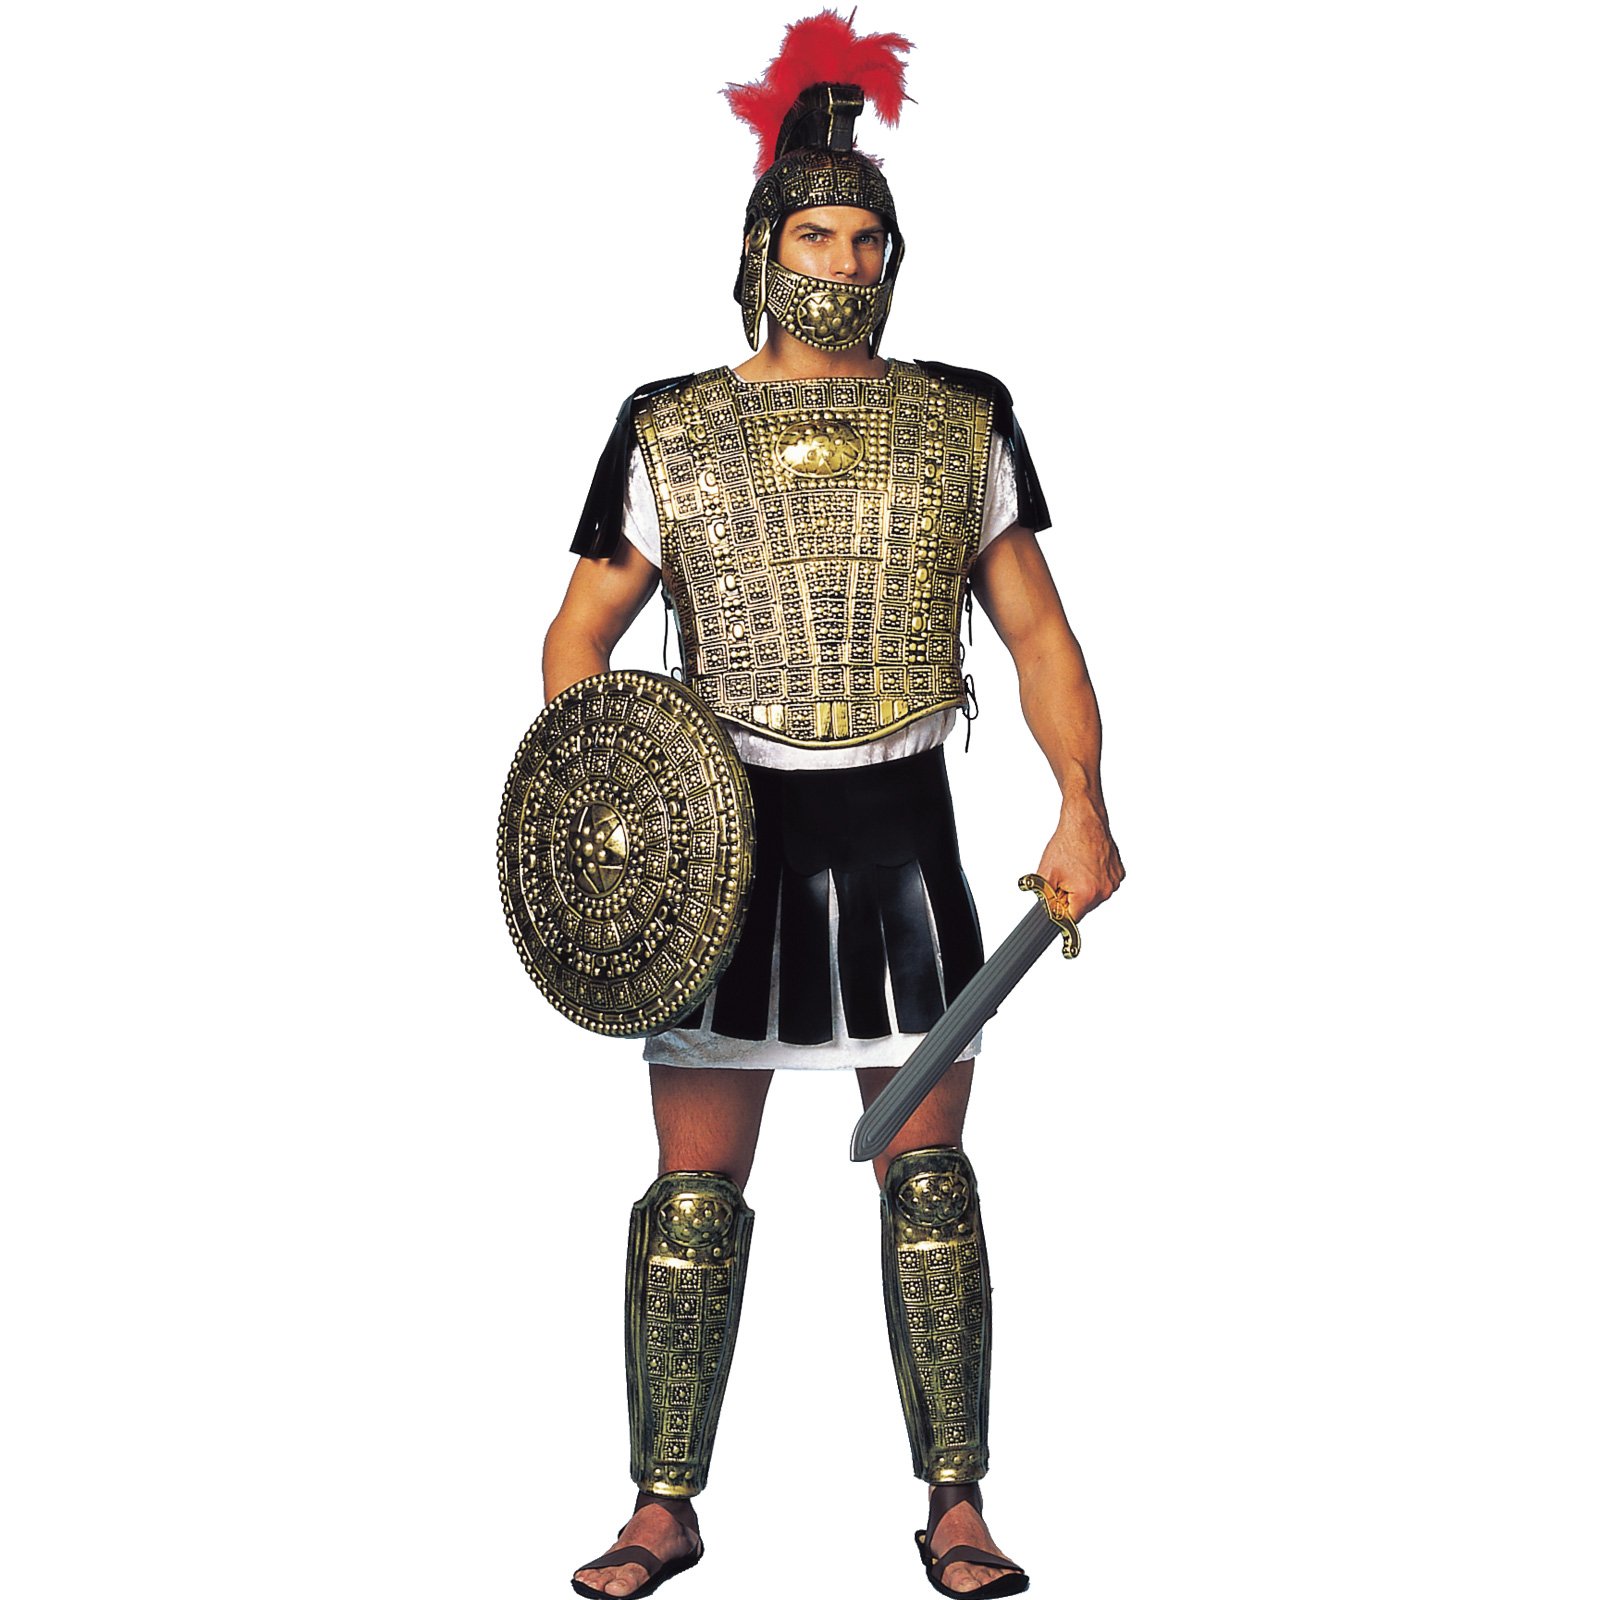 Free Picture Of A Roman Soldier, Download Free Clip Art.